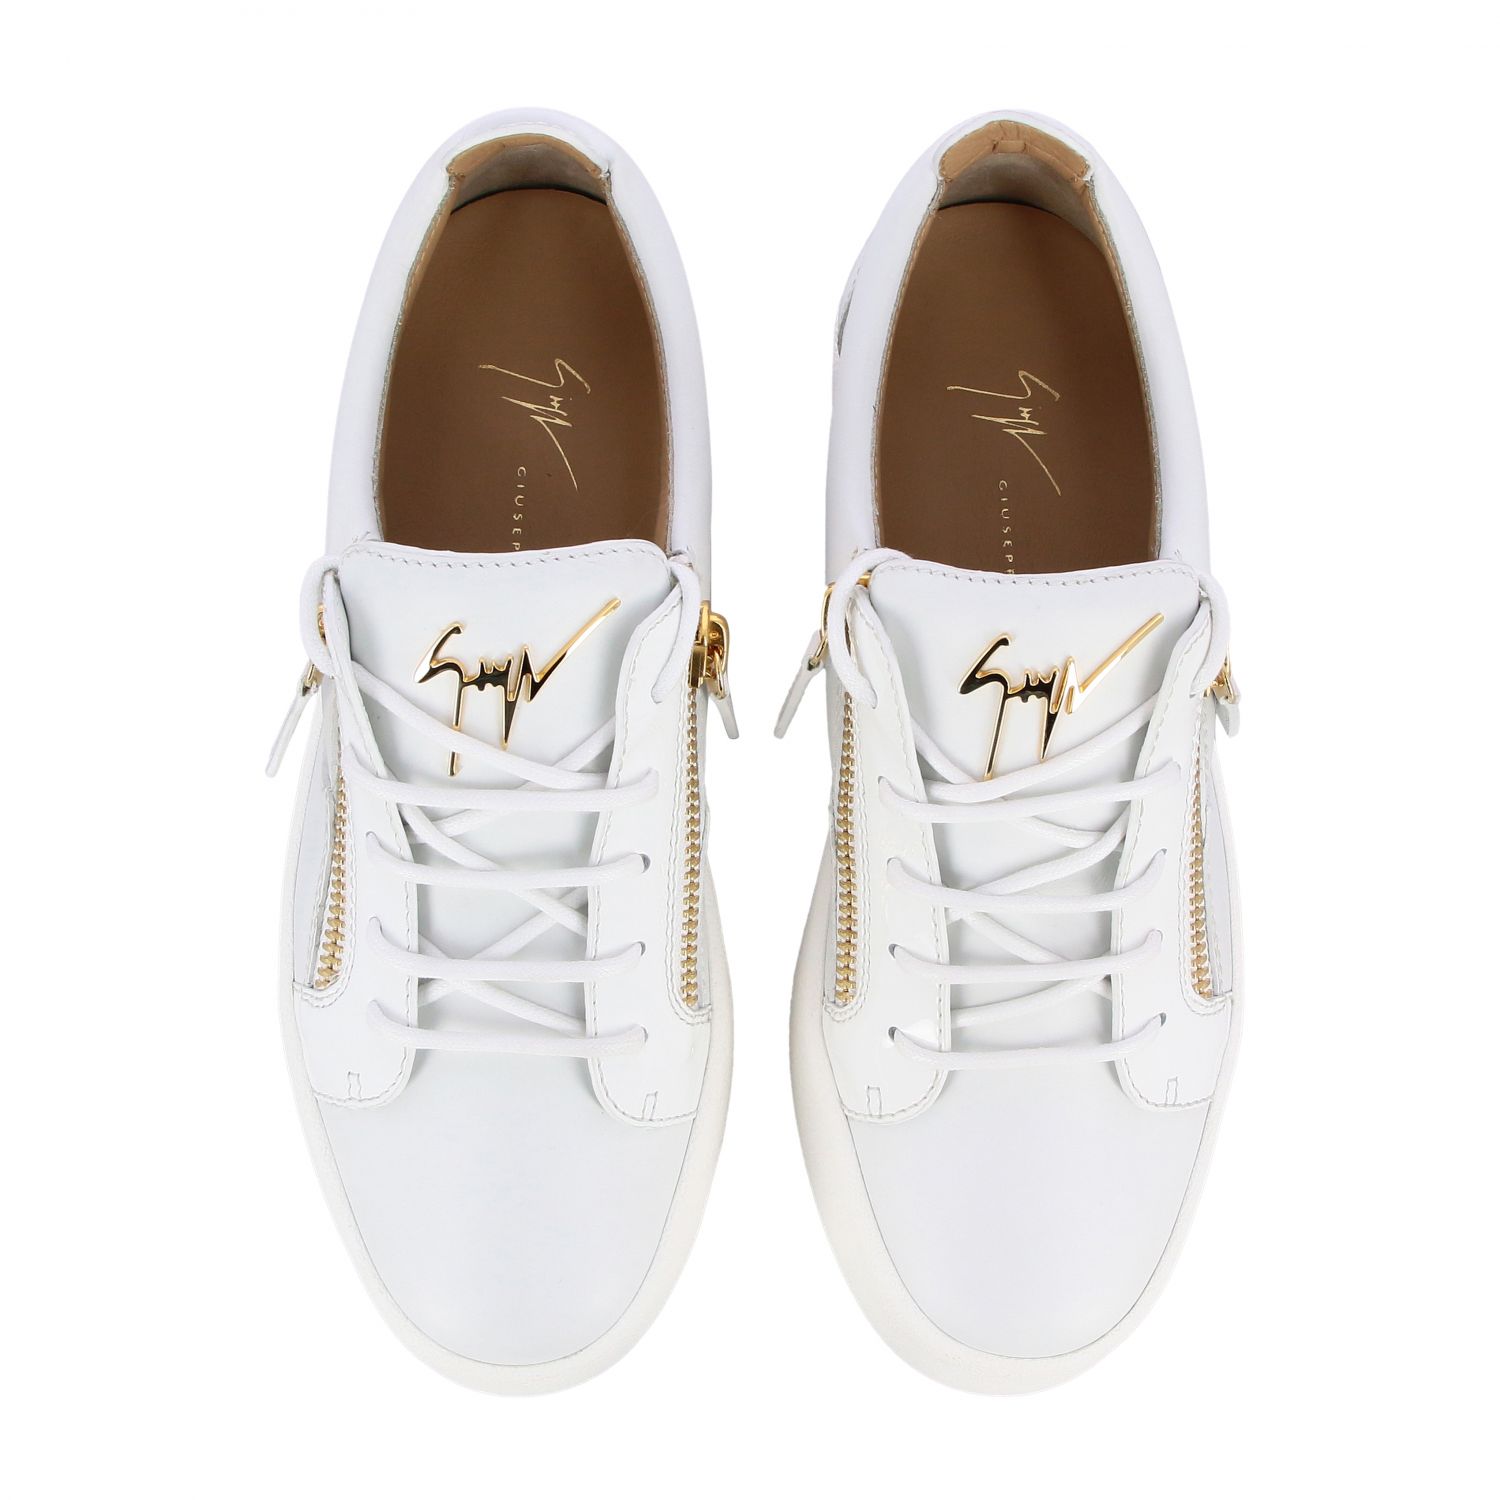 Giuseppe Zanotti Leather Sneakers in White for Men Mens Shoes Trainers Low-top trainers 